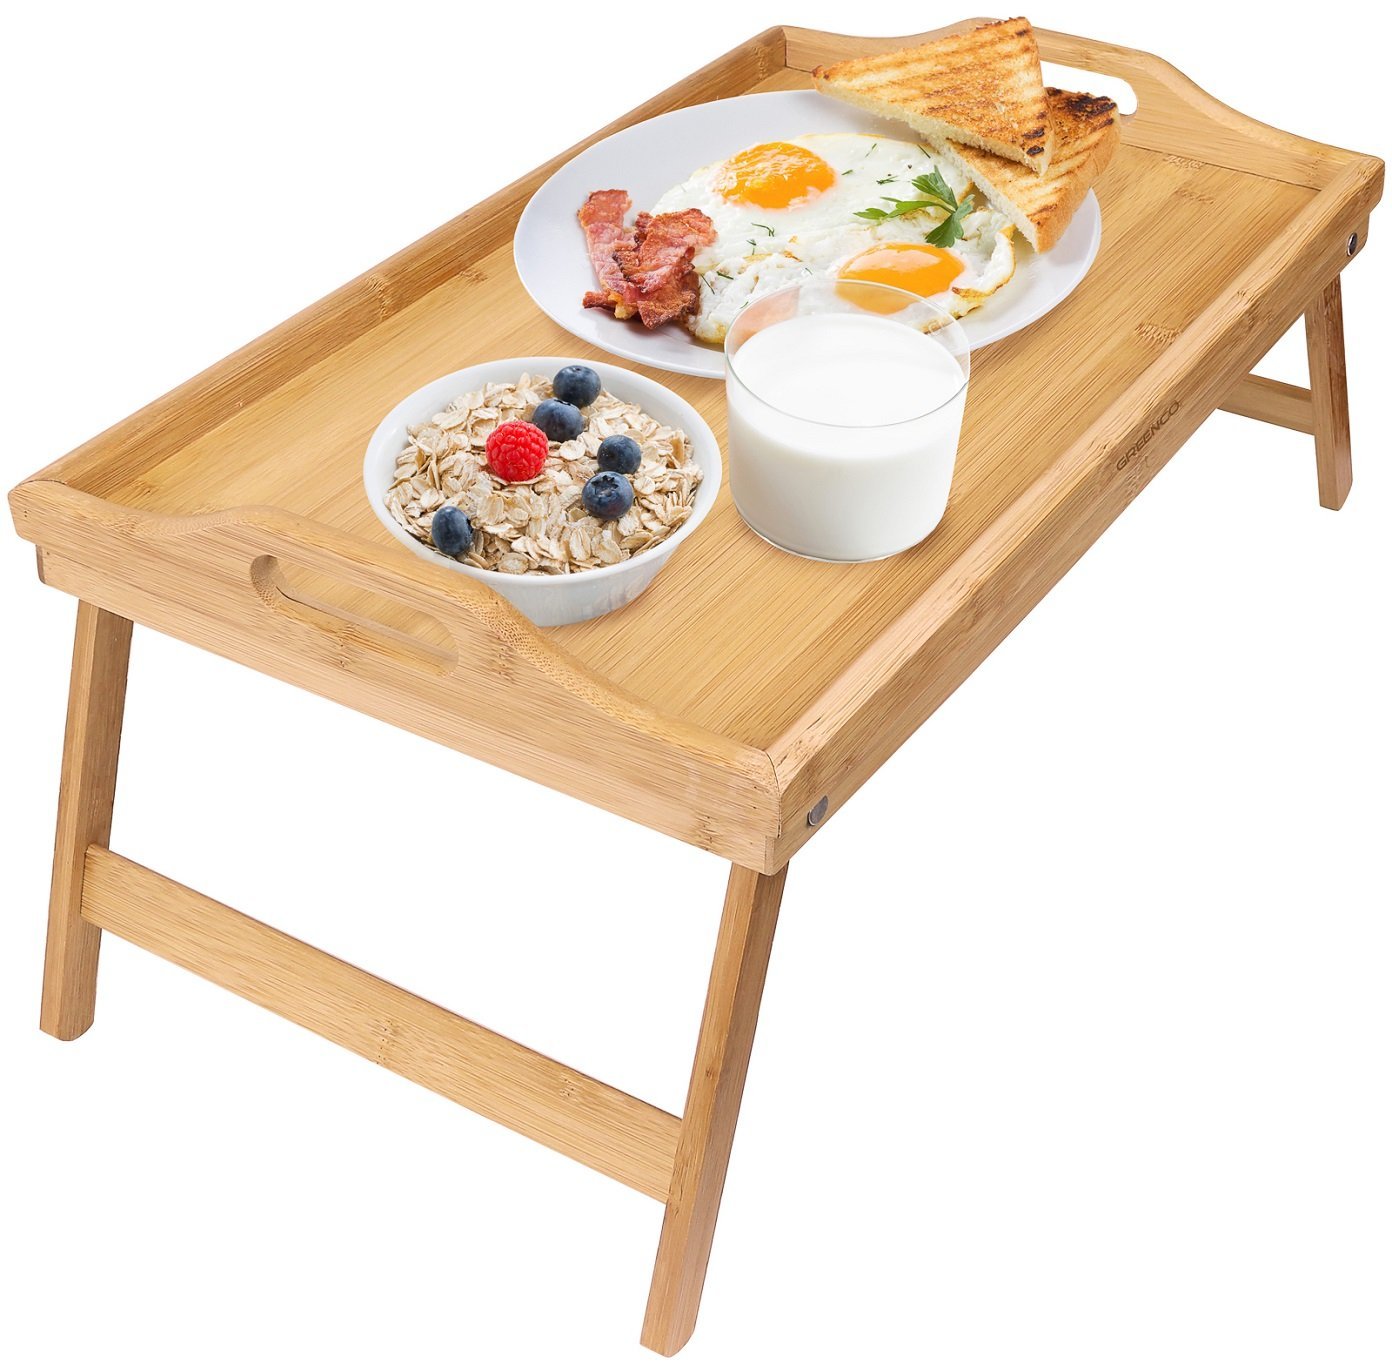 Greenco Bamboo Foldable Breakfast Table, Laptop Desk, Bed Table, Serving Tray